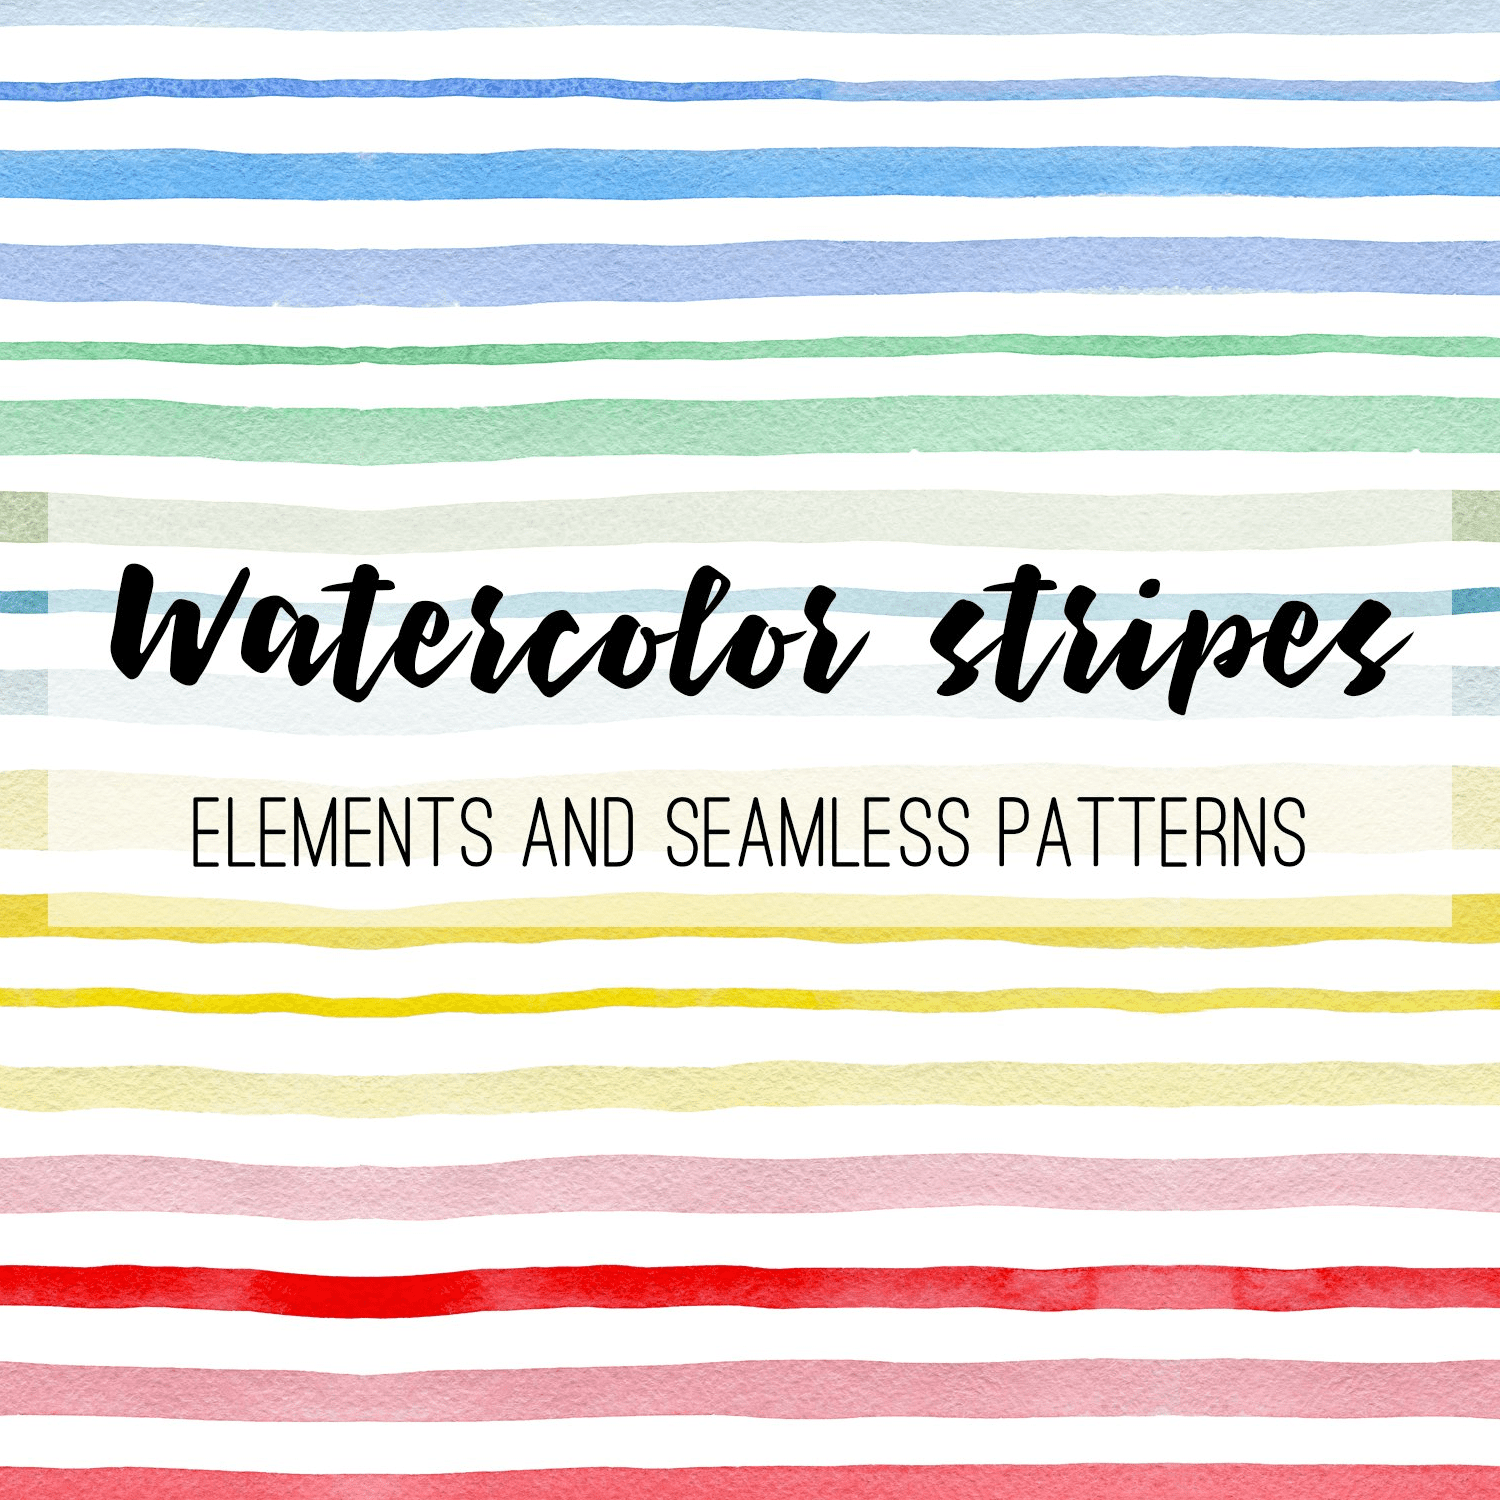 Watercolor Stripes and Patterns.